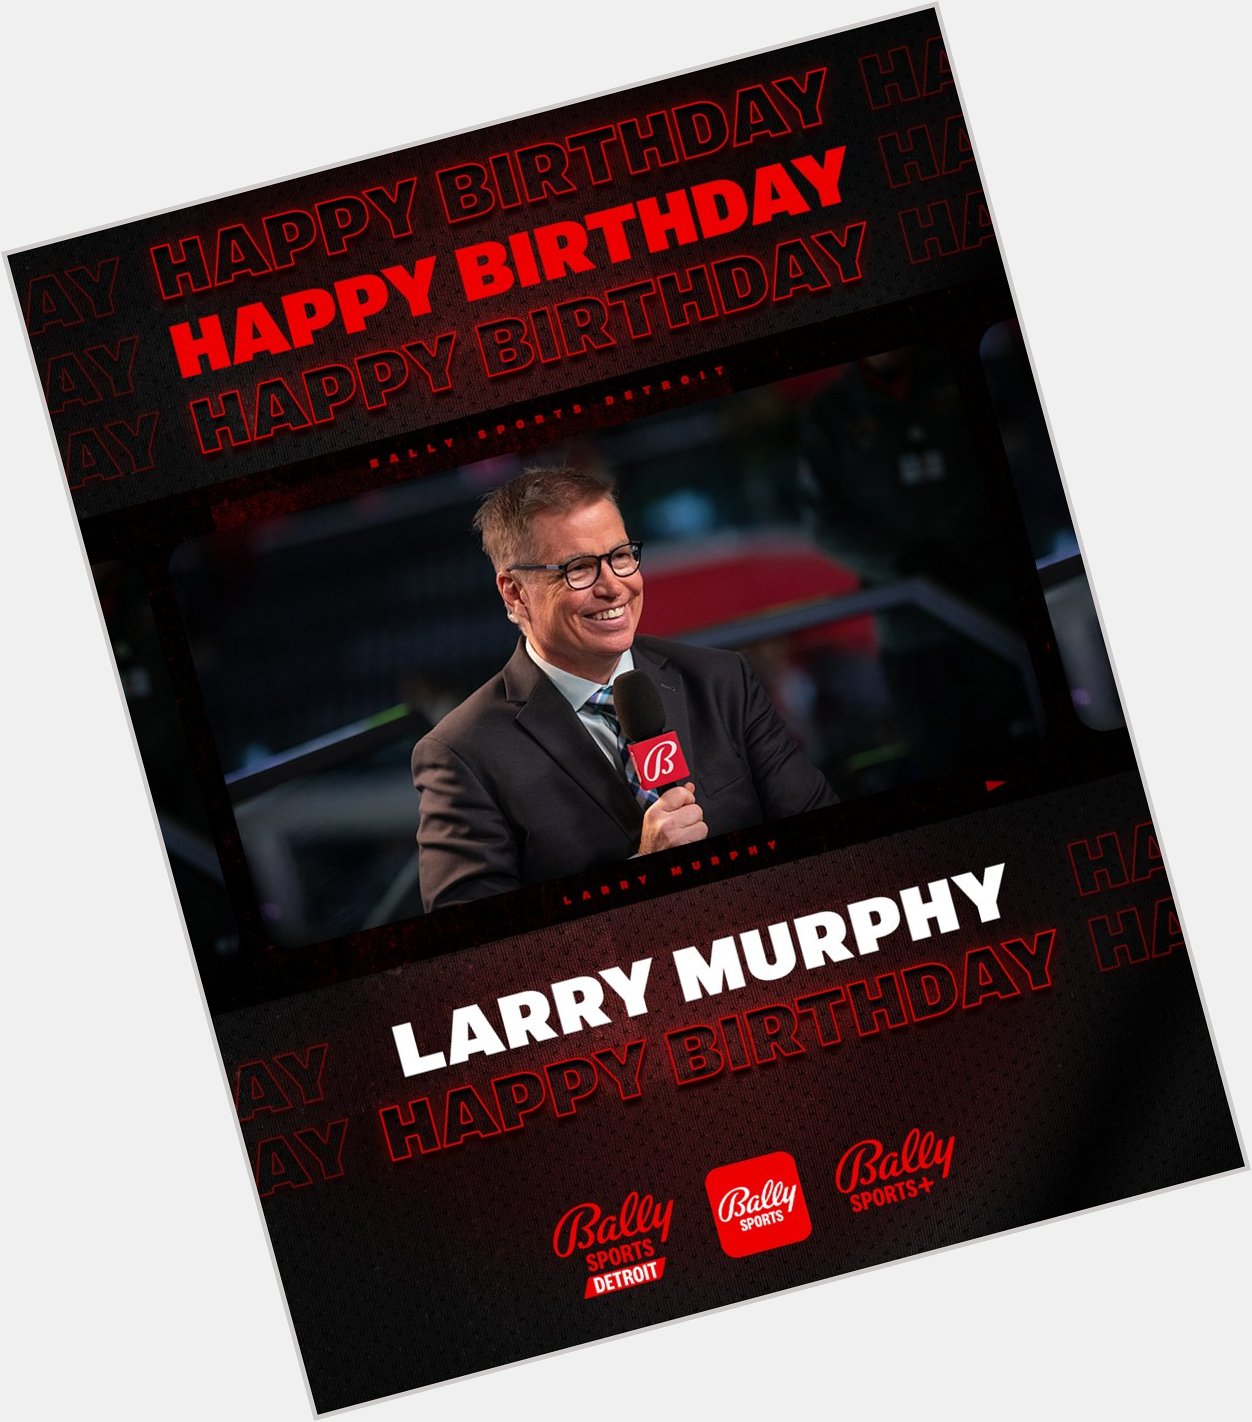 Wishing a happy birthday to our very own Larry Murphy! 